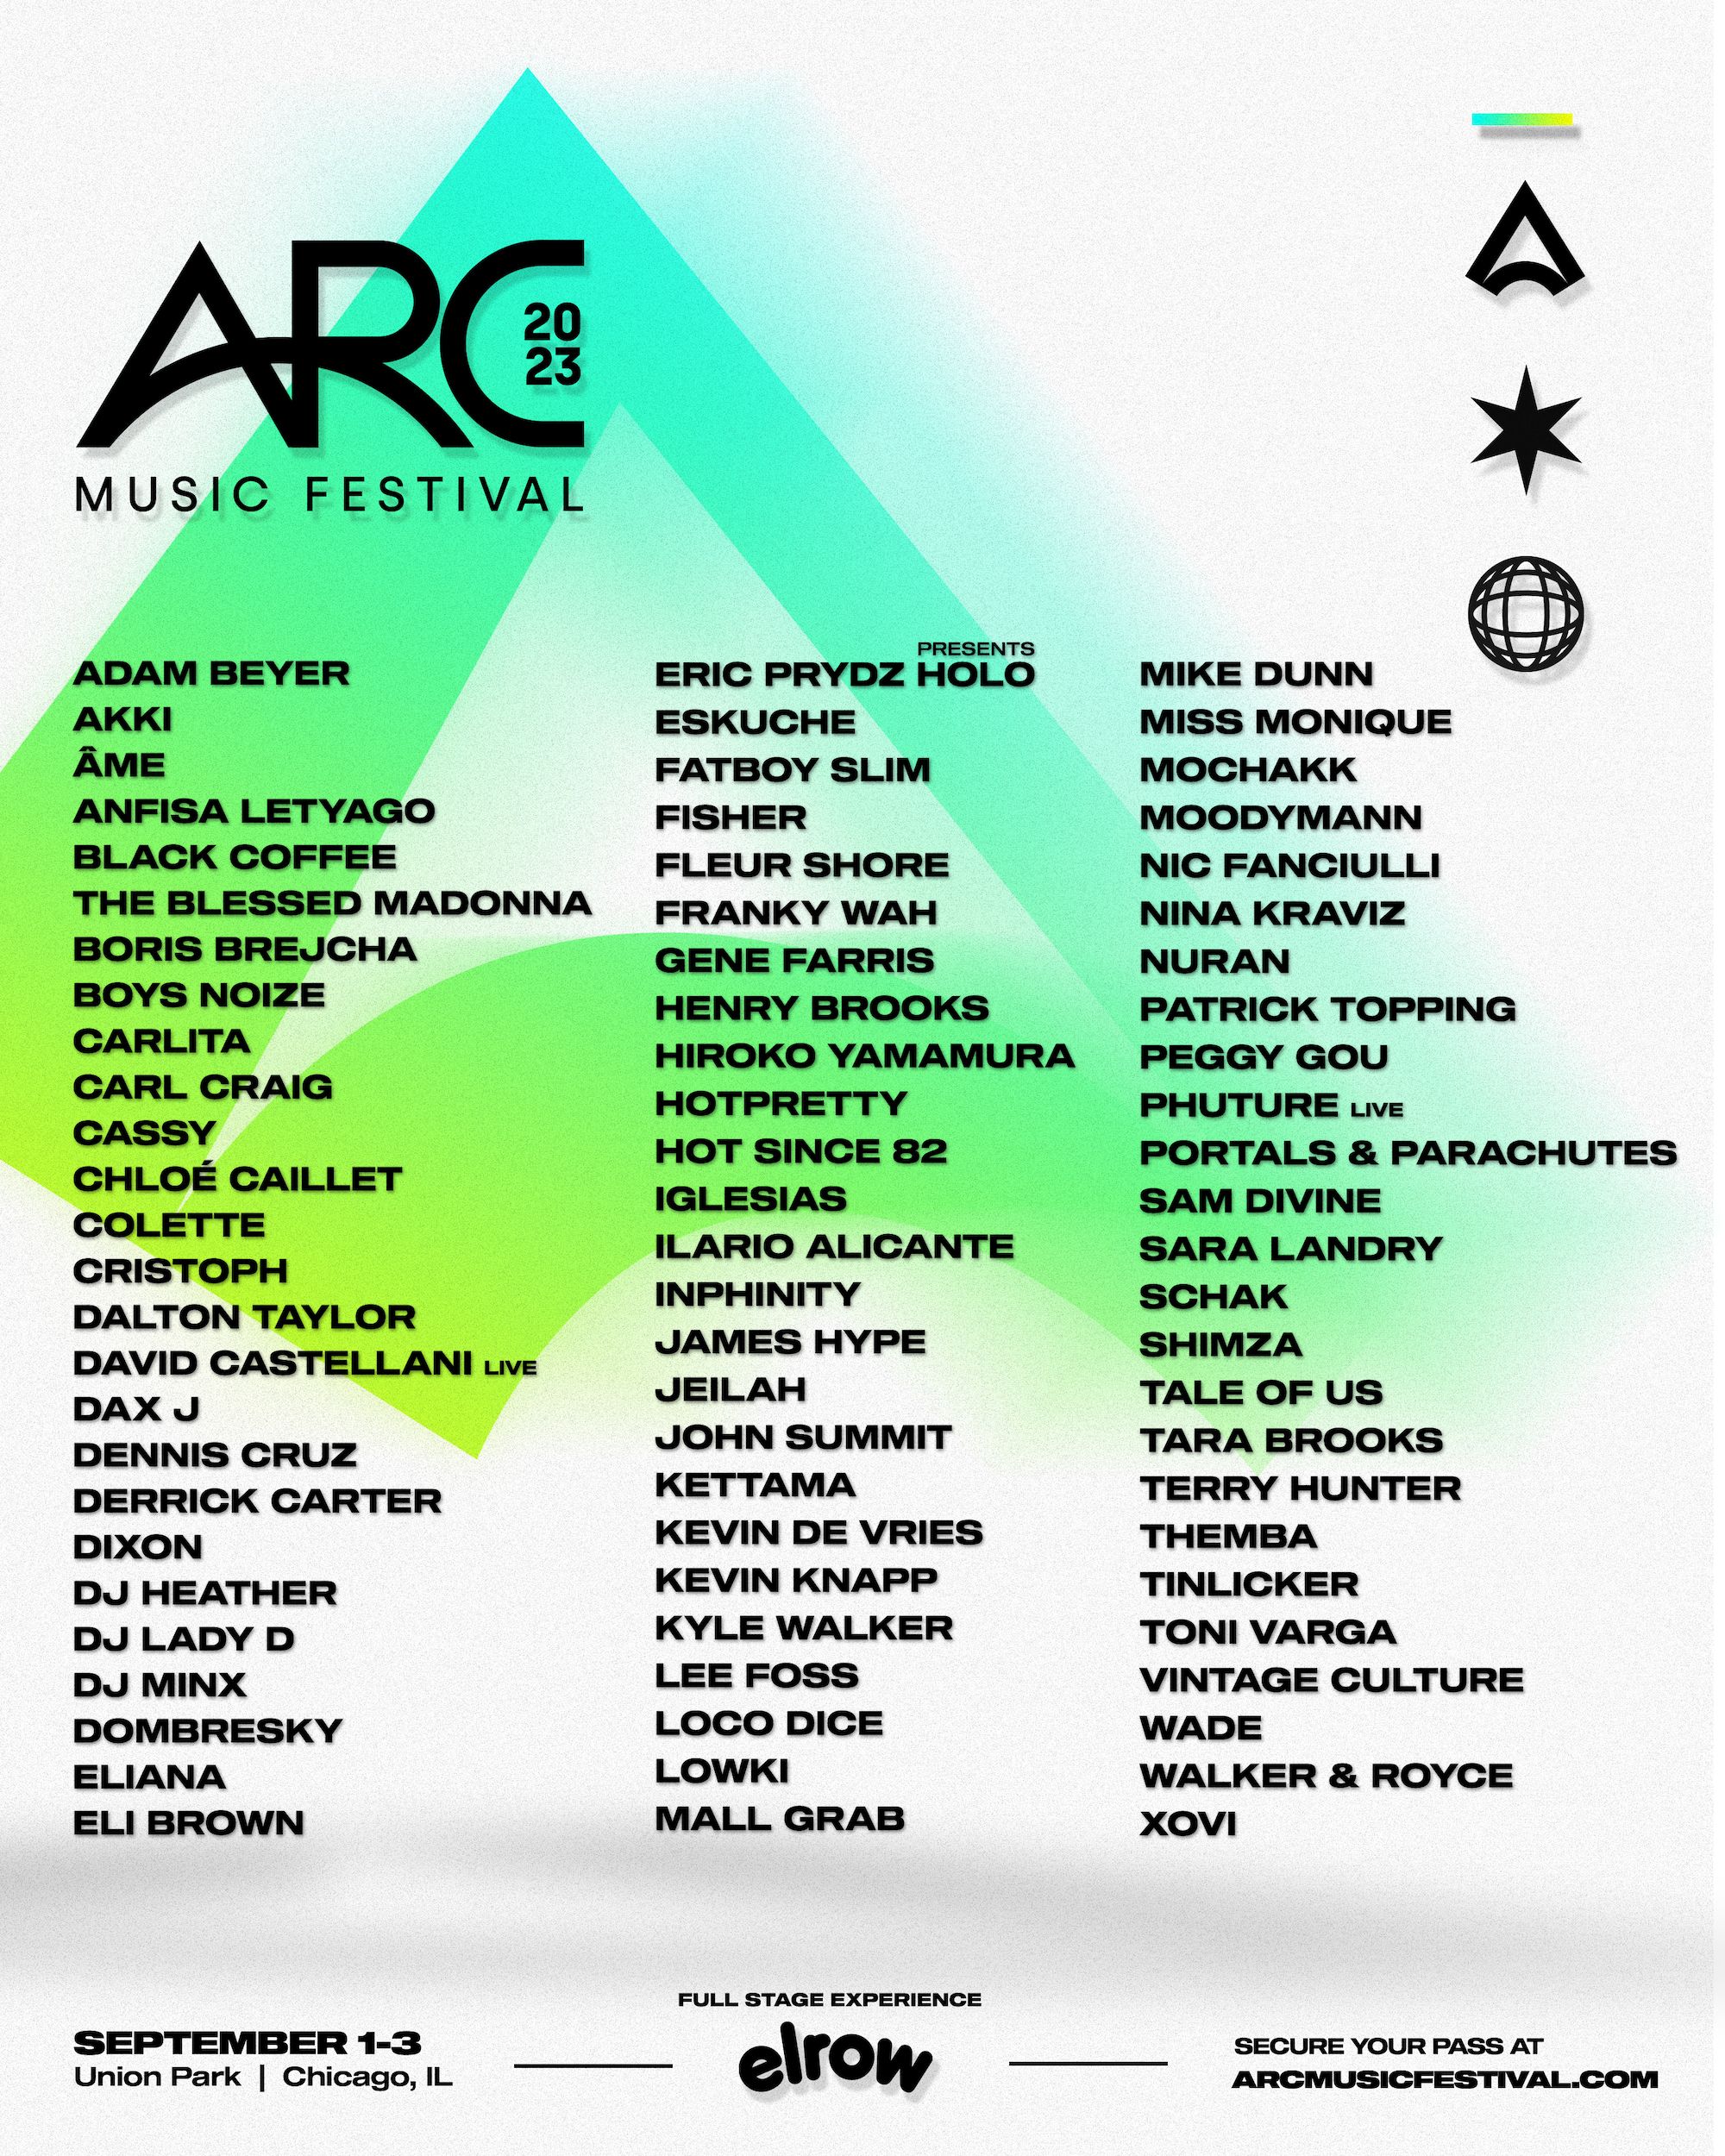 ARC Music Festival Announces Lineup Additions for 2023